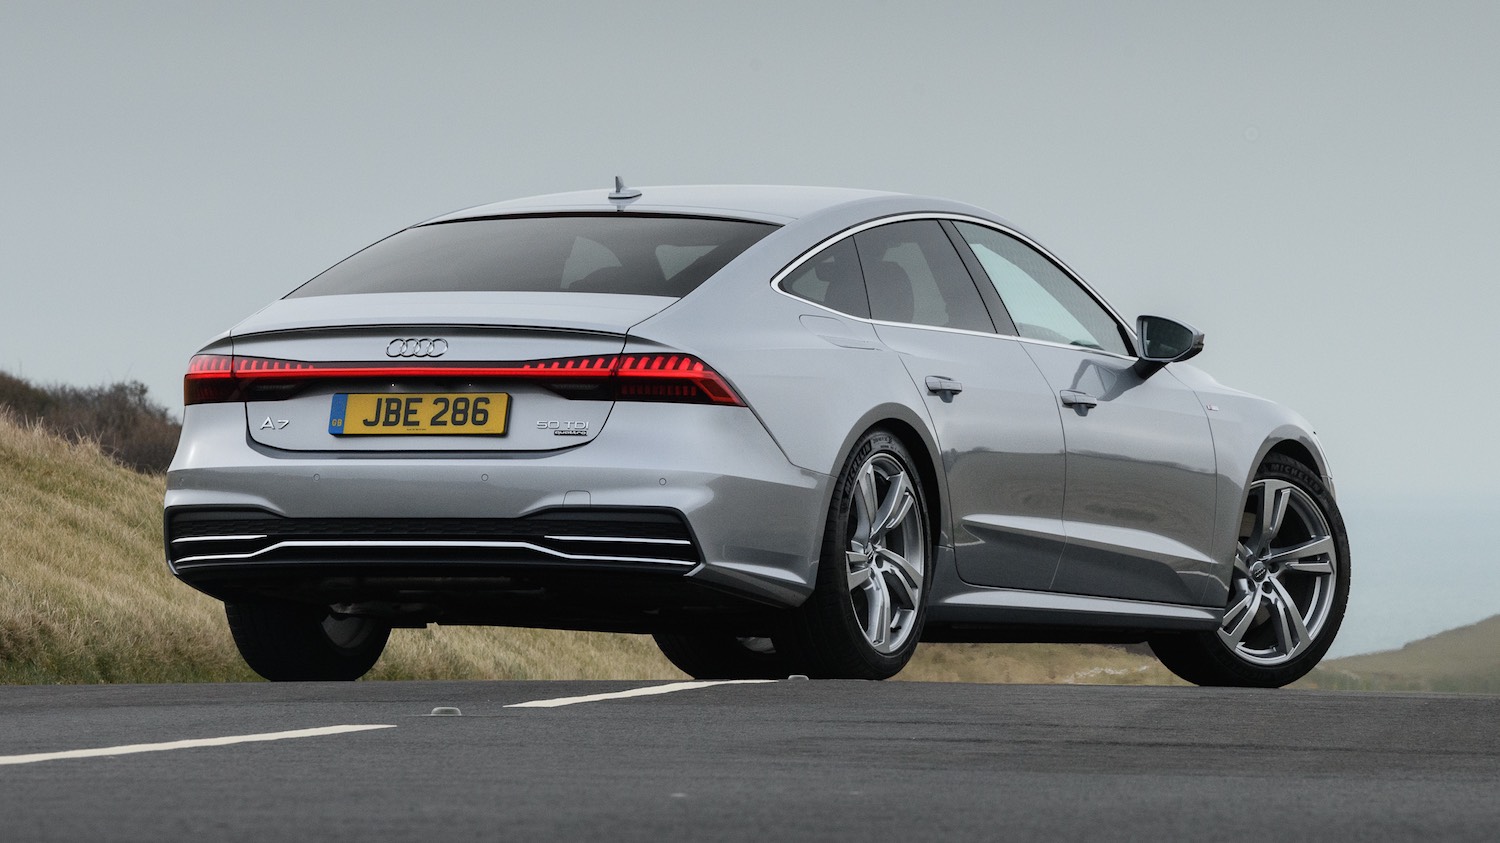 Neil Lyndon motoring correspondent reviews the latest Audi A7 for Drive 14